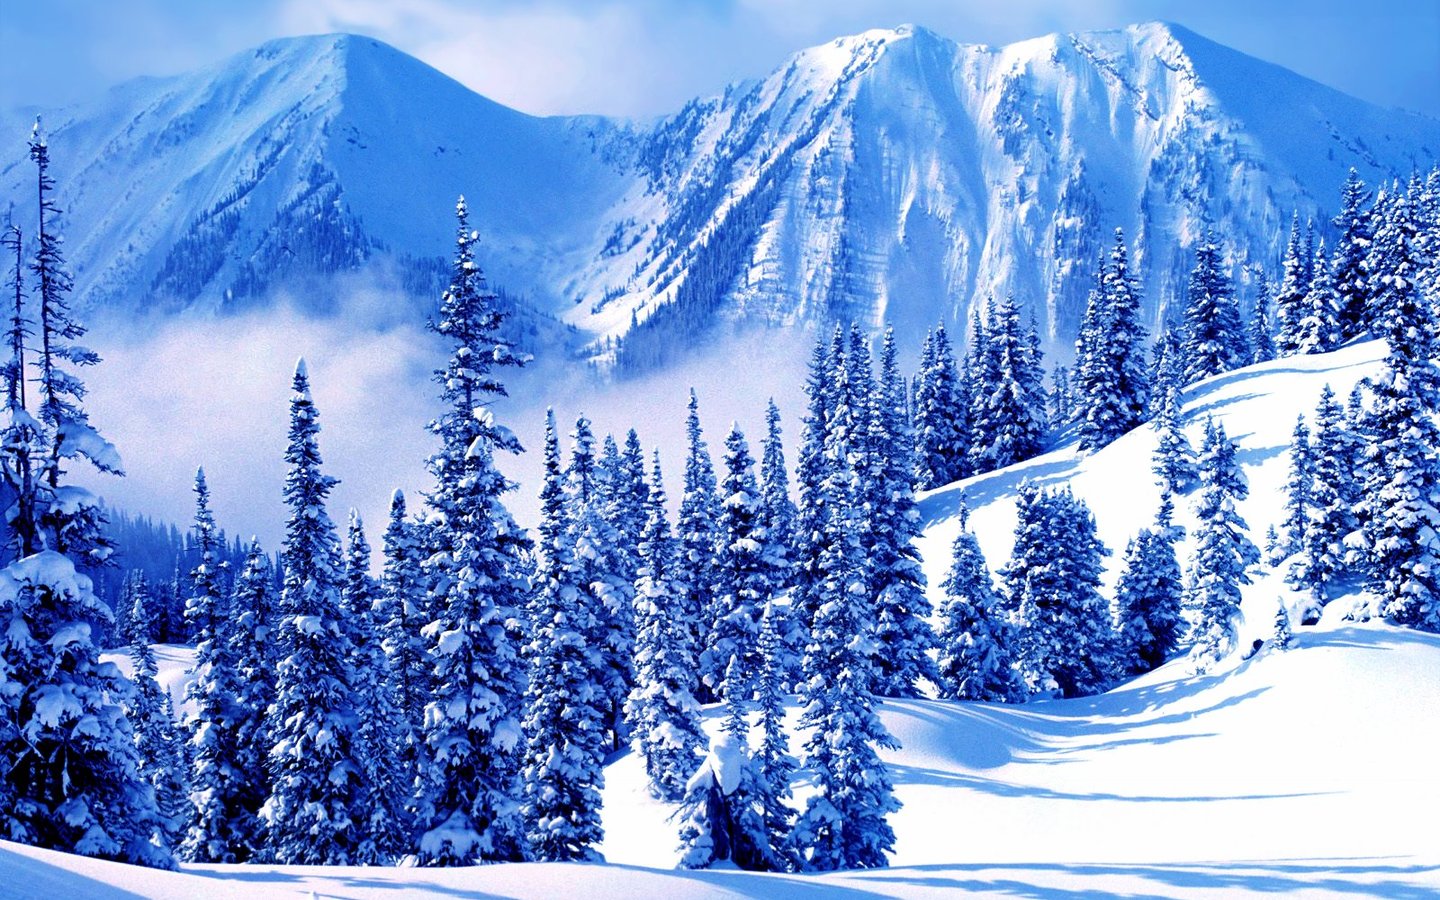  HQ Winter Mountains Wallpaper   HQ Wallpapers 1440x900